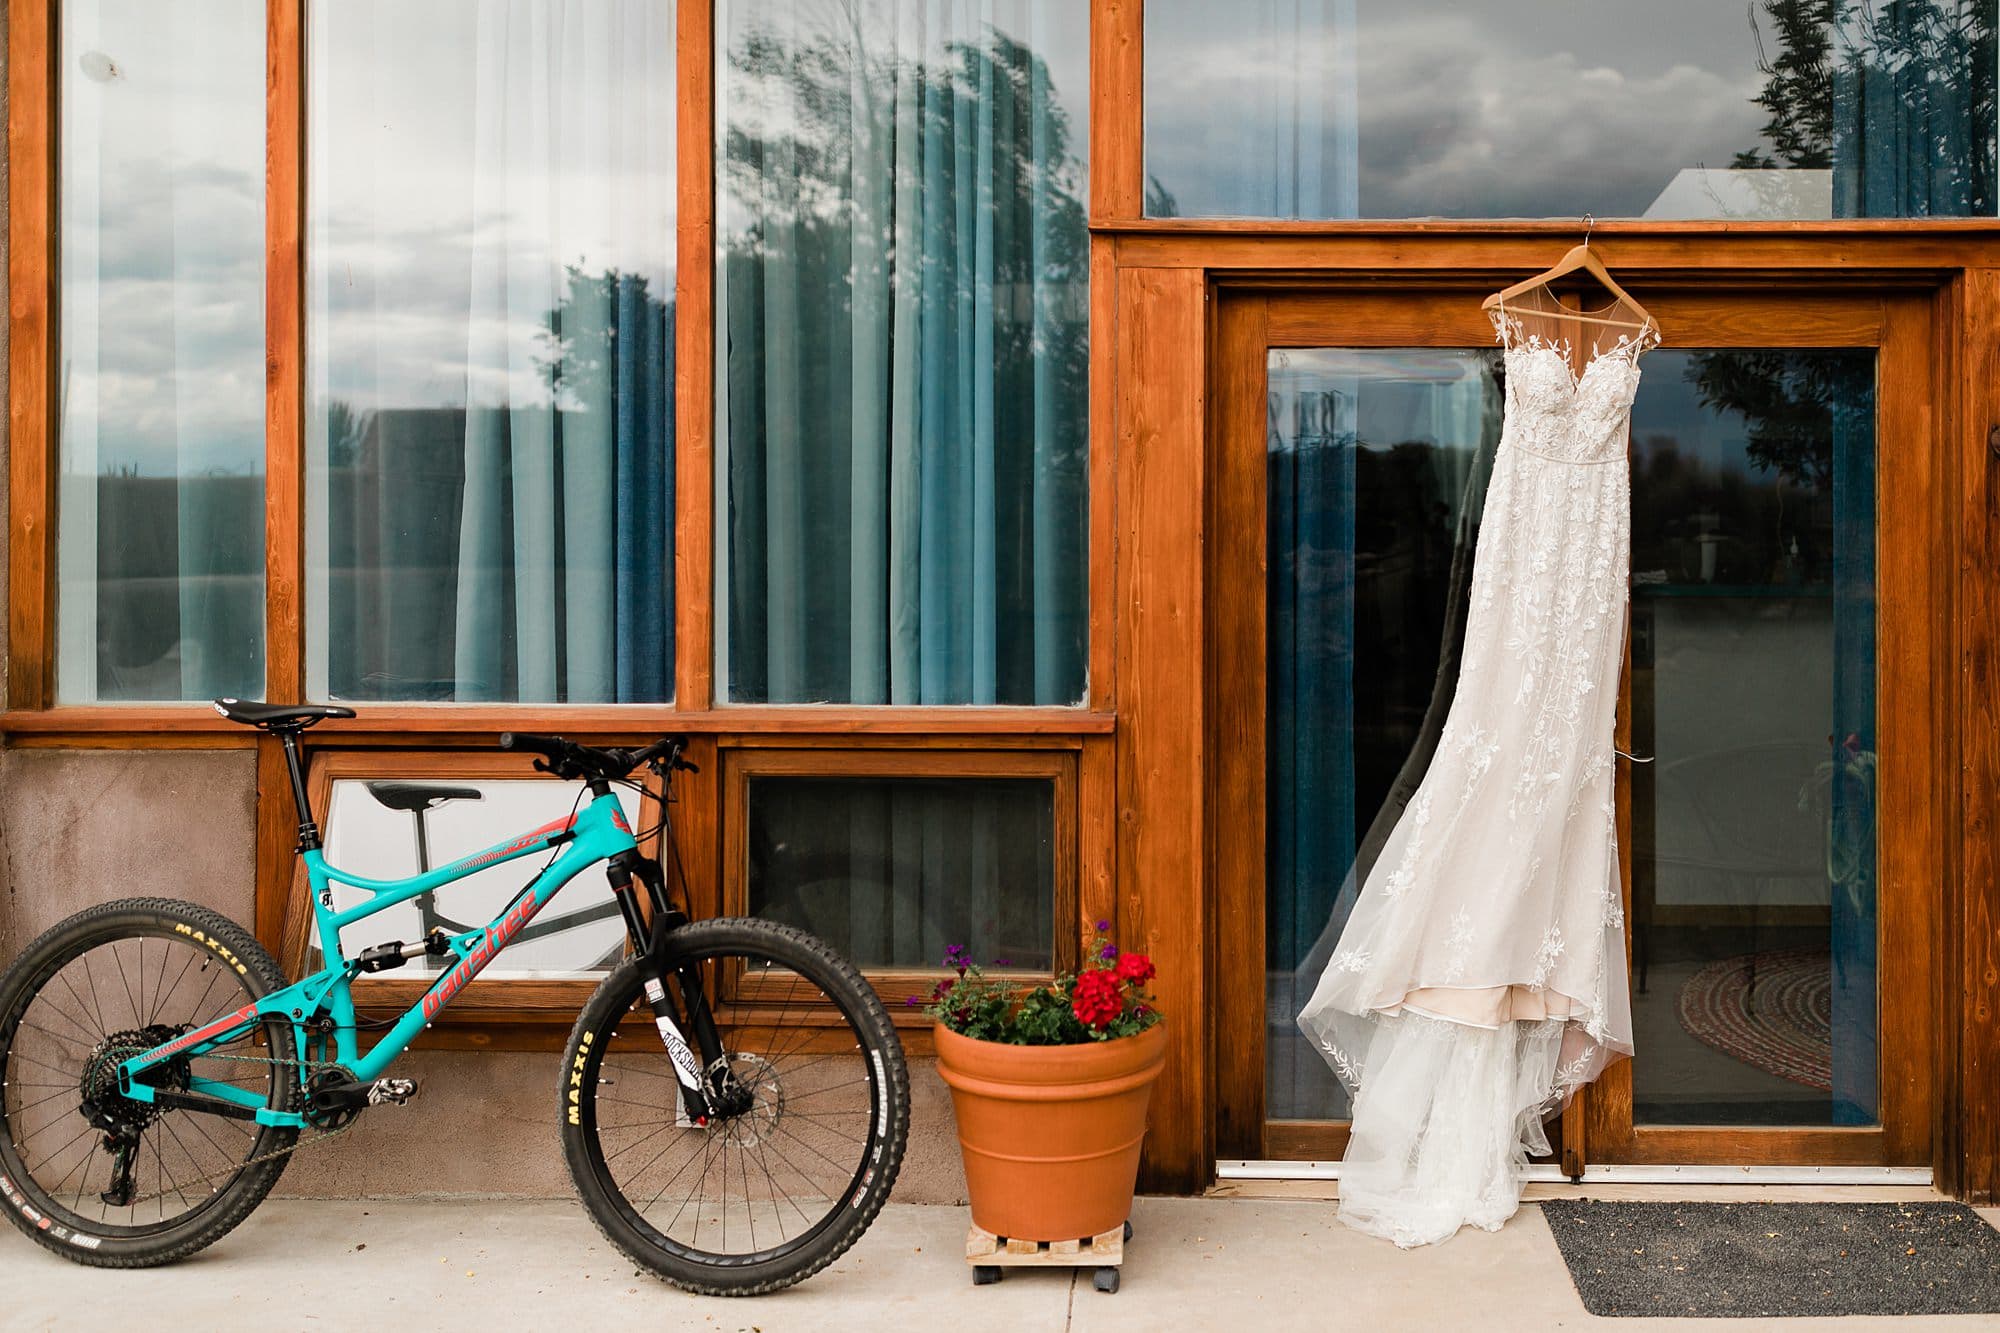 A wedding dress and bicycle accent the architecture of an Earthship in Taos.